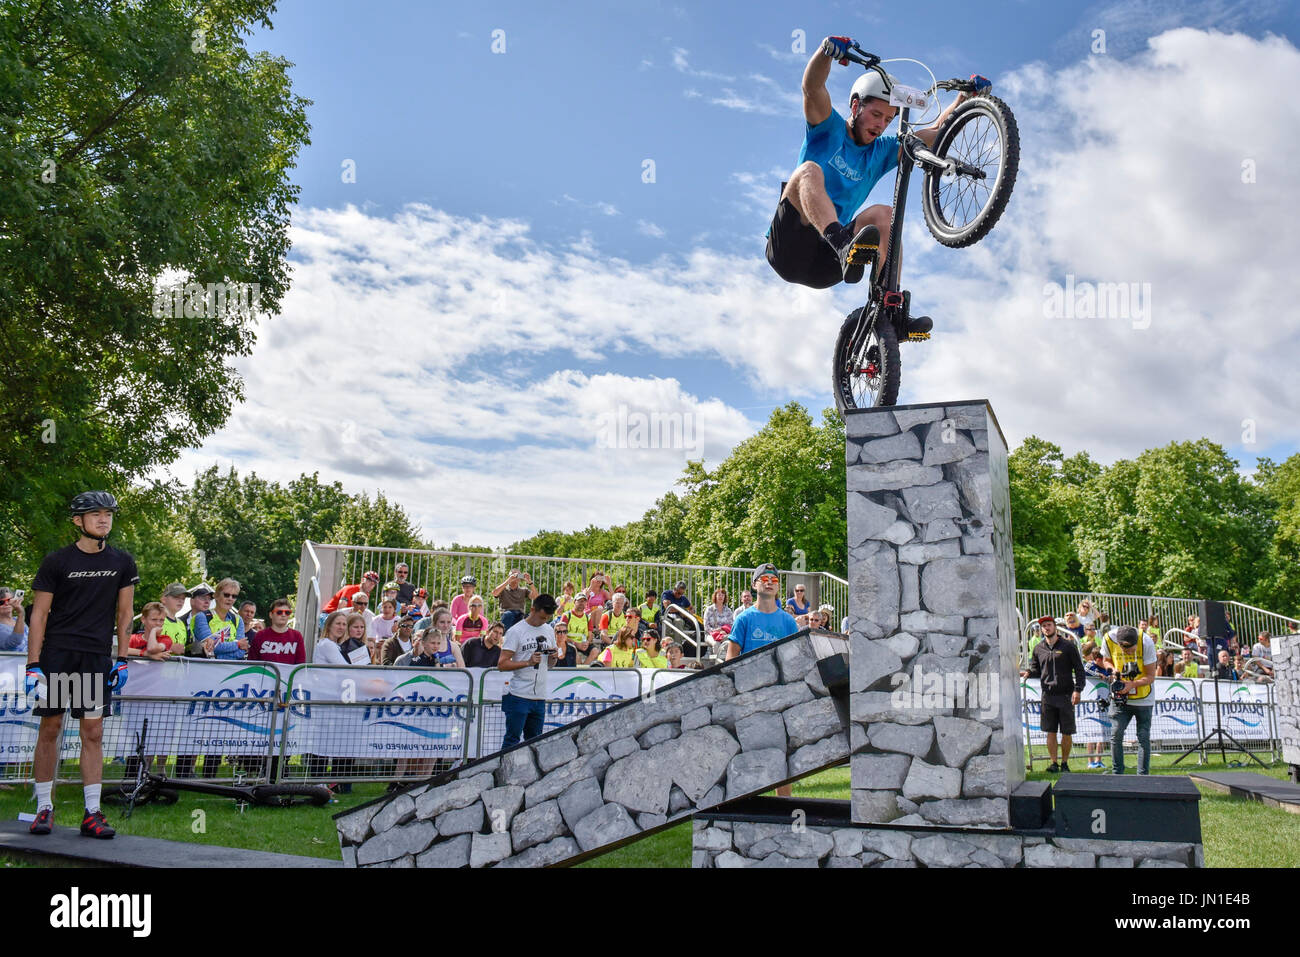 London, UK.  29 July 2017.  Members of the Andrei Burton stunt riding team take part in the London Trials Championships in Green Park tackling a course made up of tricky obstacles.  The event is part of Prudential RideLondon FreeCycle, a three day celebration of cycling taking place in the capital with over 100,000 people participating over the weekend.   Credit: Stephen Chung / Alamy Live News Stock Photo